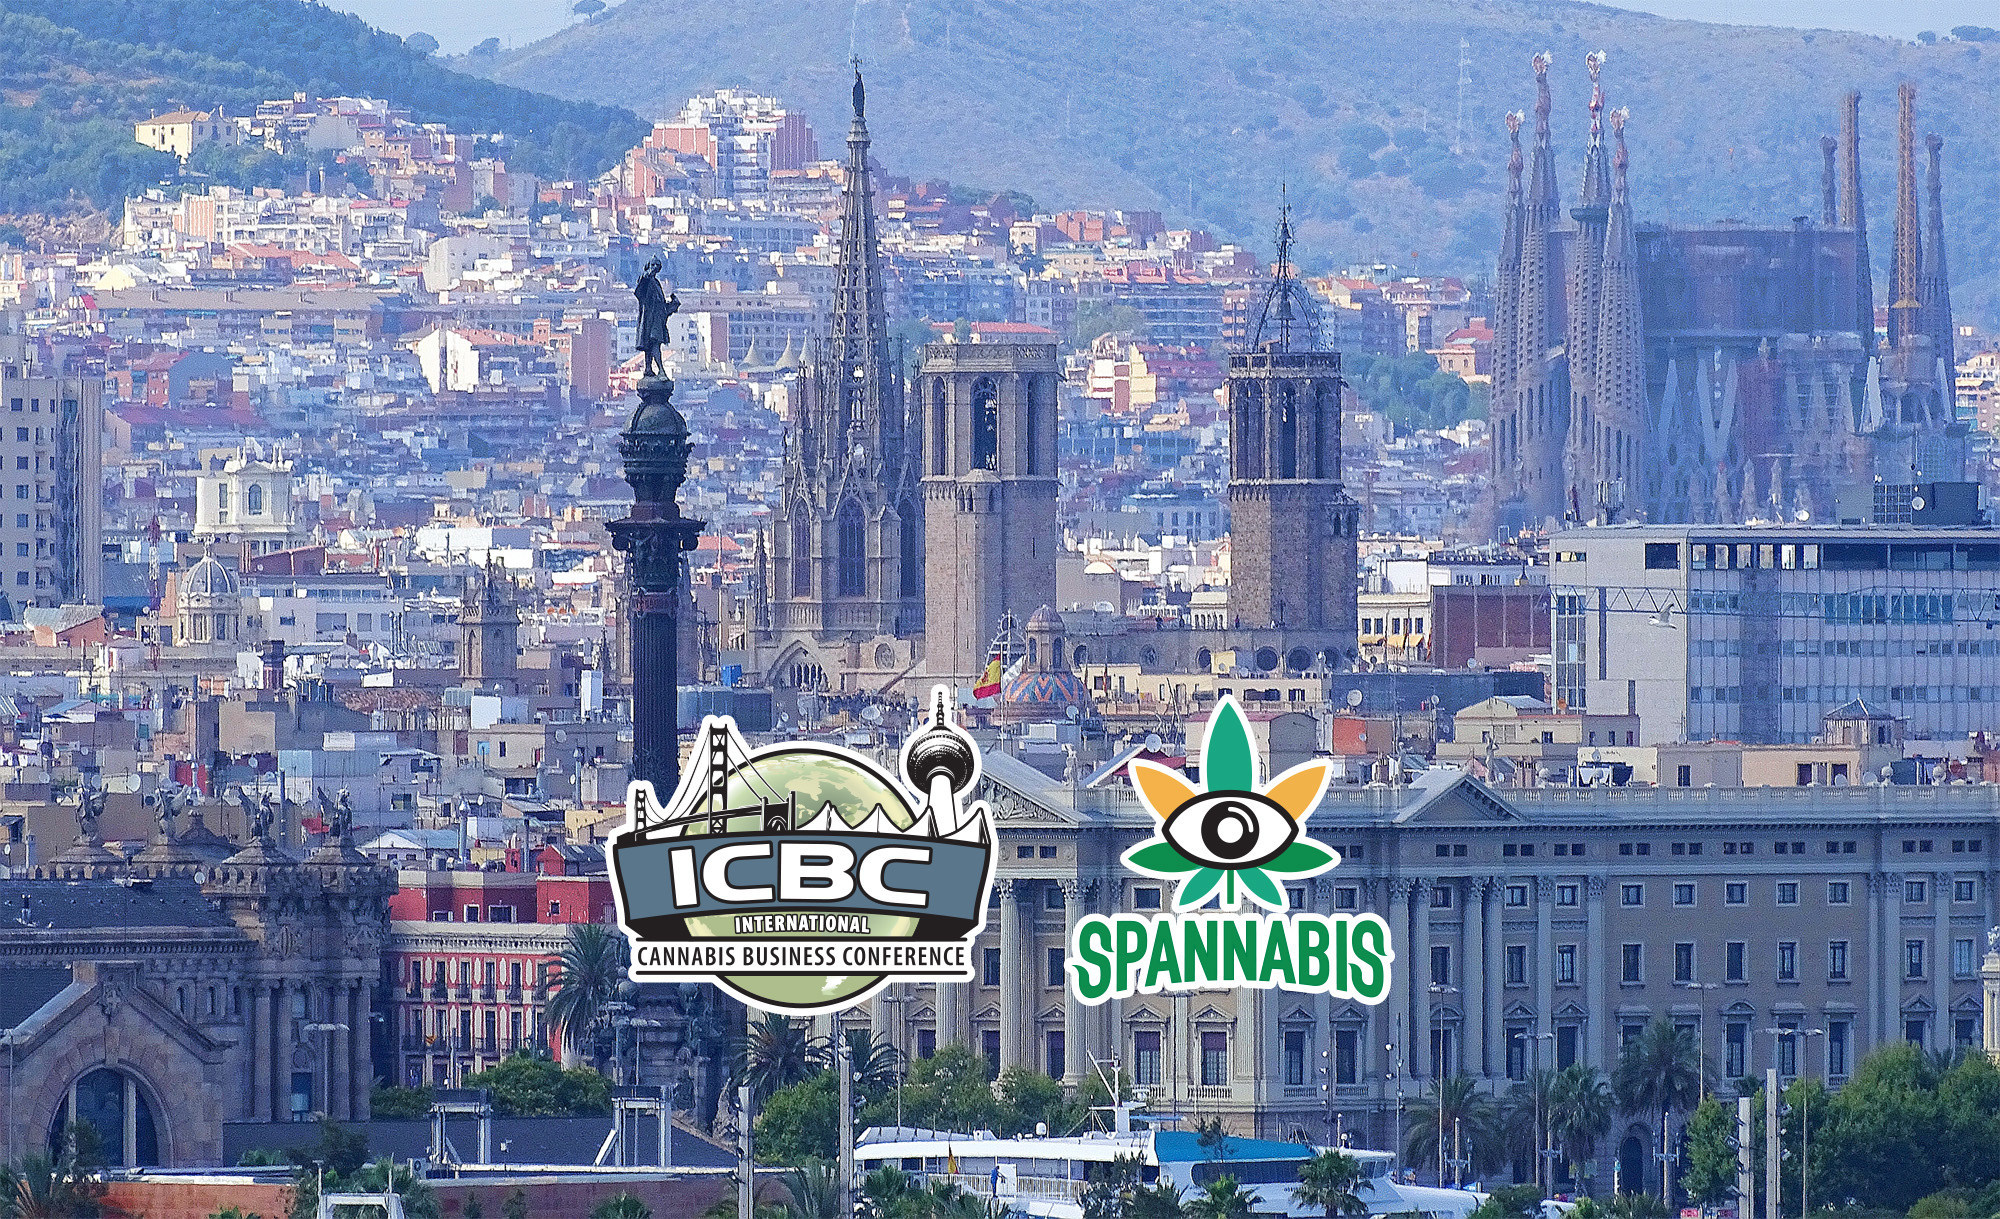 The International Cannabis Business Conference, the world's premier B2B cannabis industry event is joining forces with Spannabis, the world's biggest cannabis trade show, in Barcelona, Spain, on March 14, 2019.